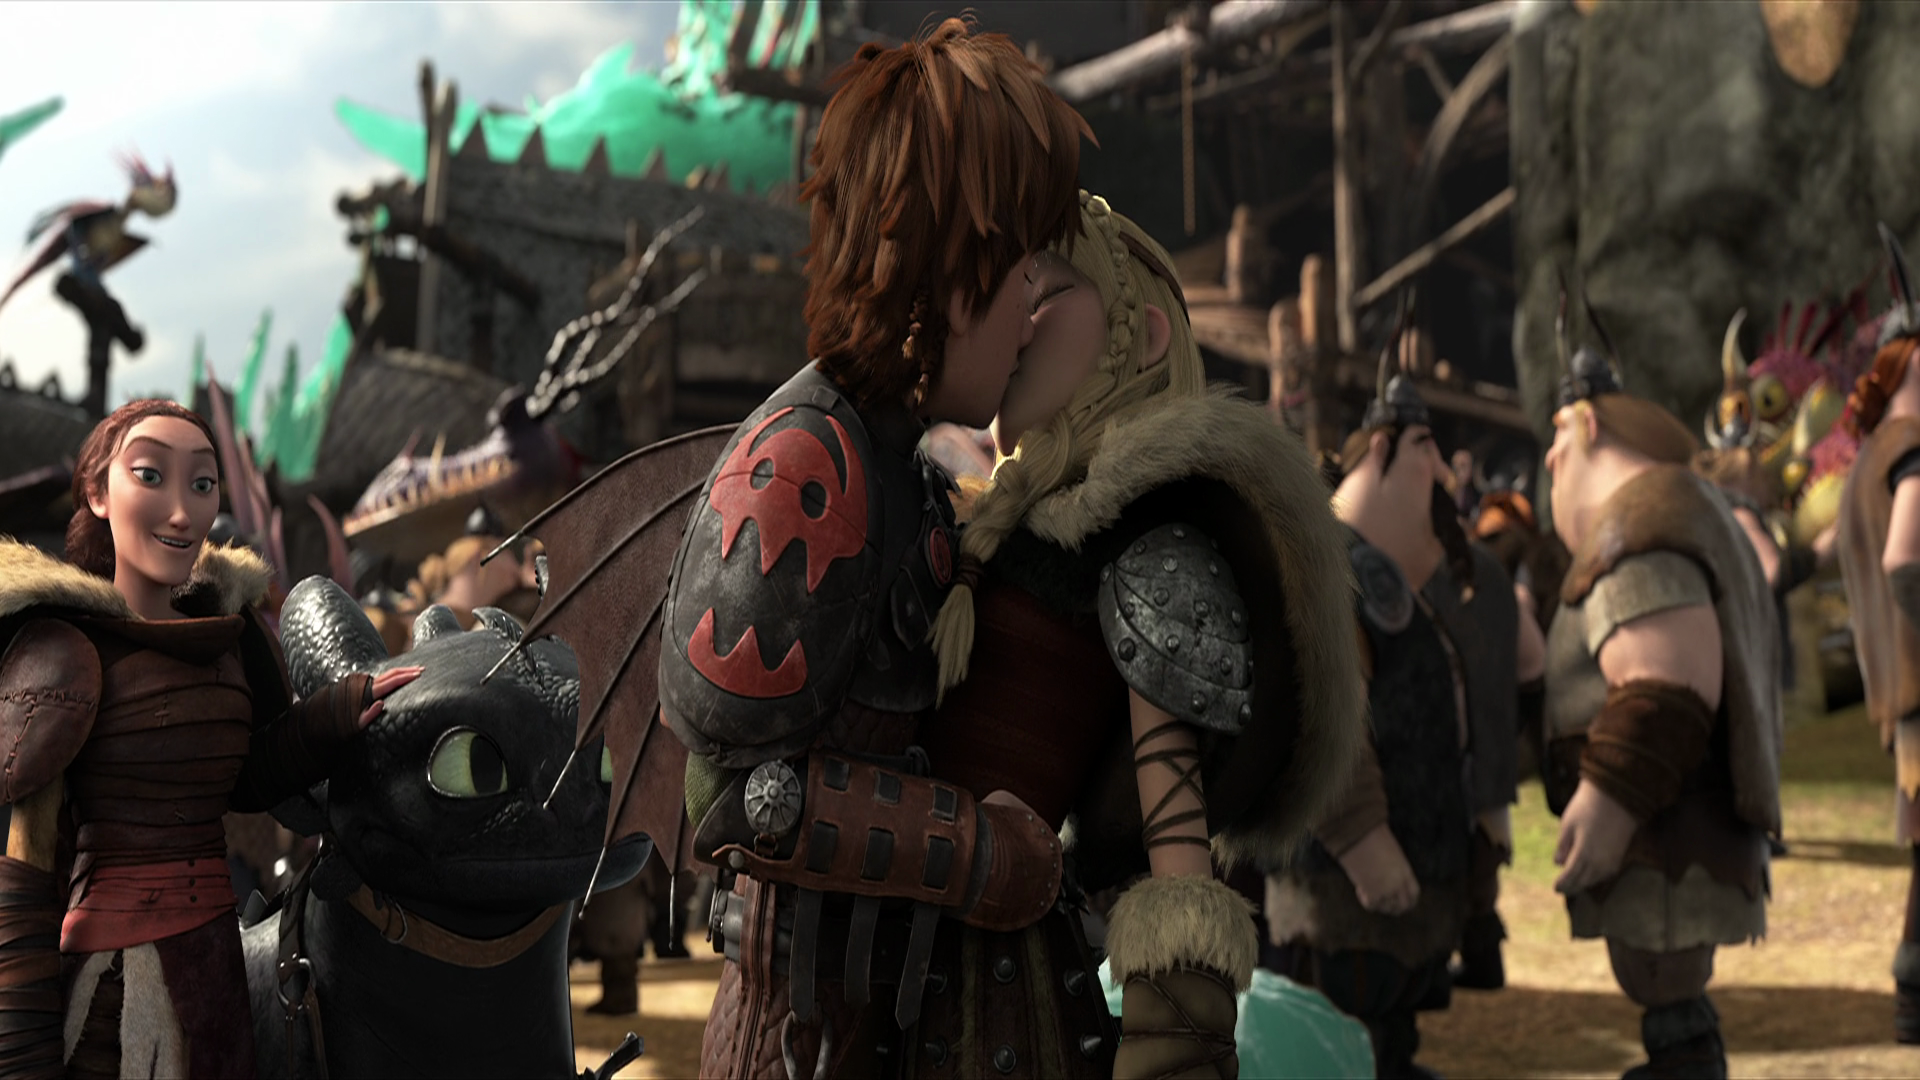 How to train your dragon 1080p download torrent 3dconfig autocad mac torrent